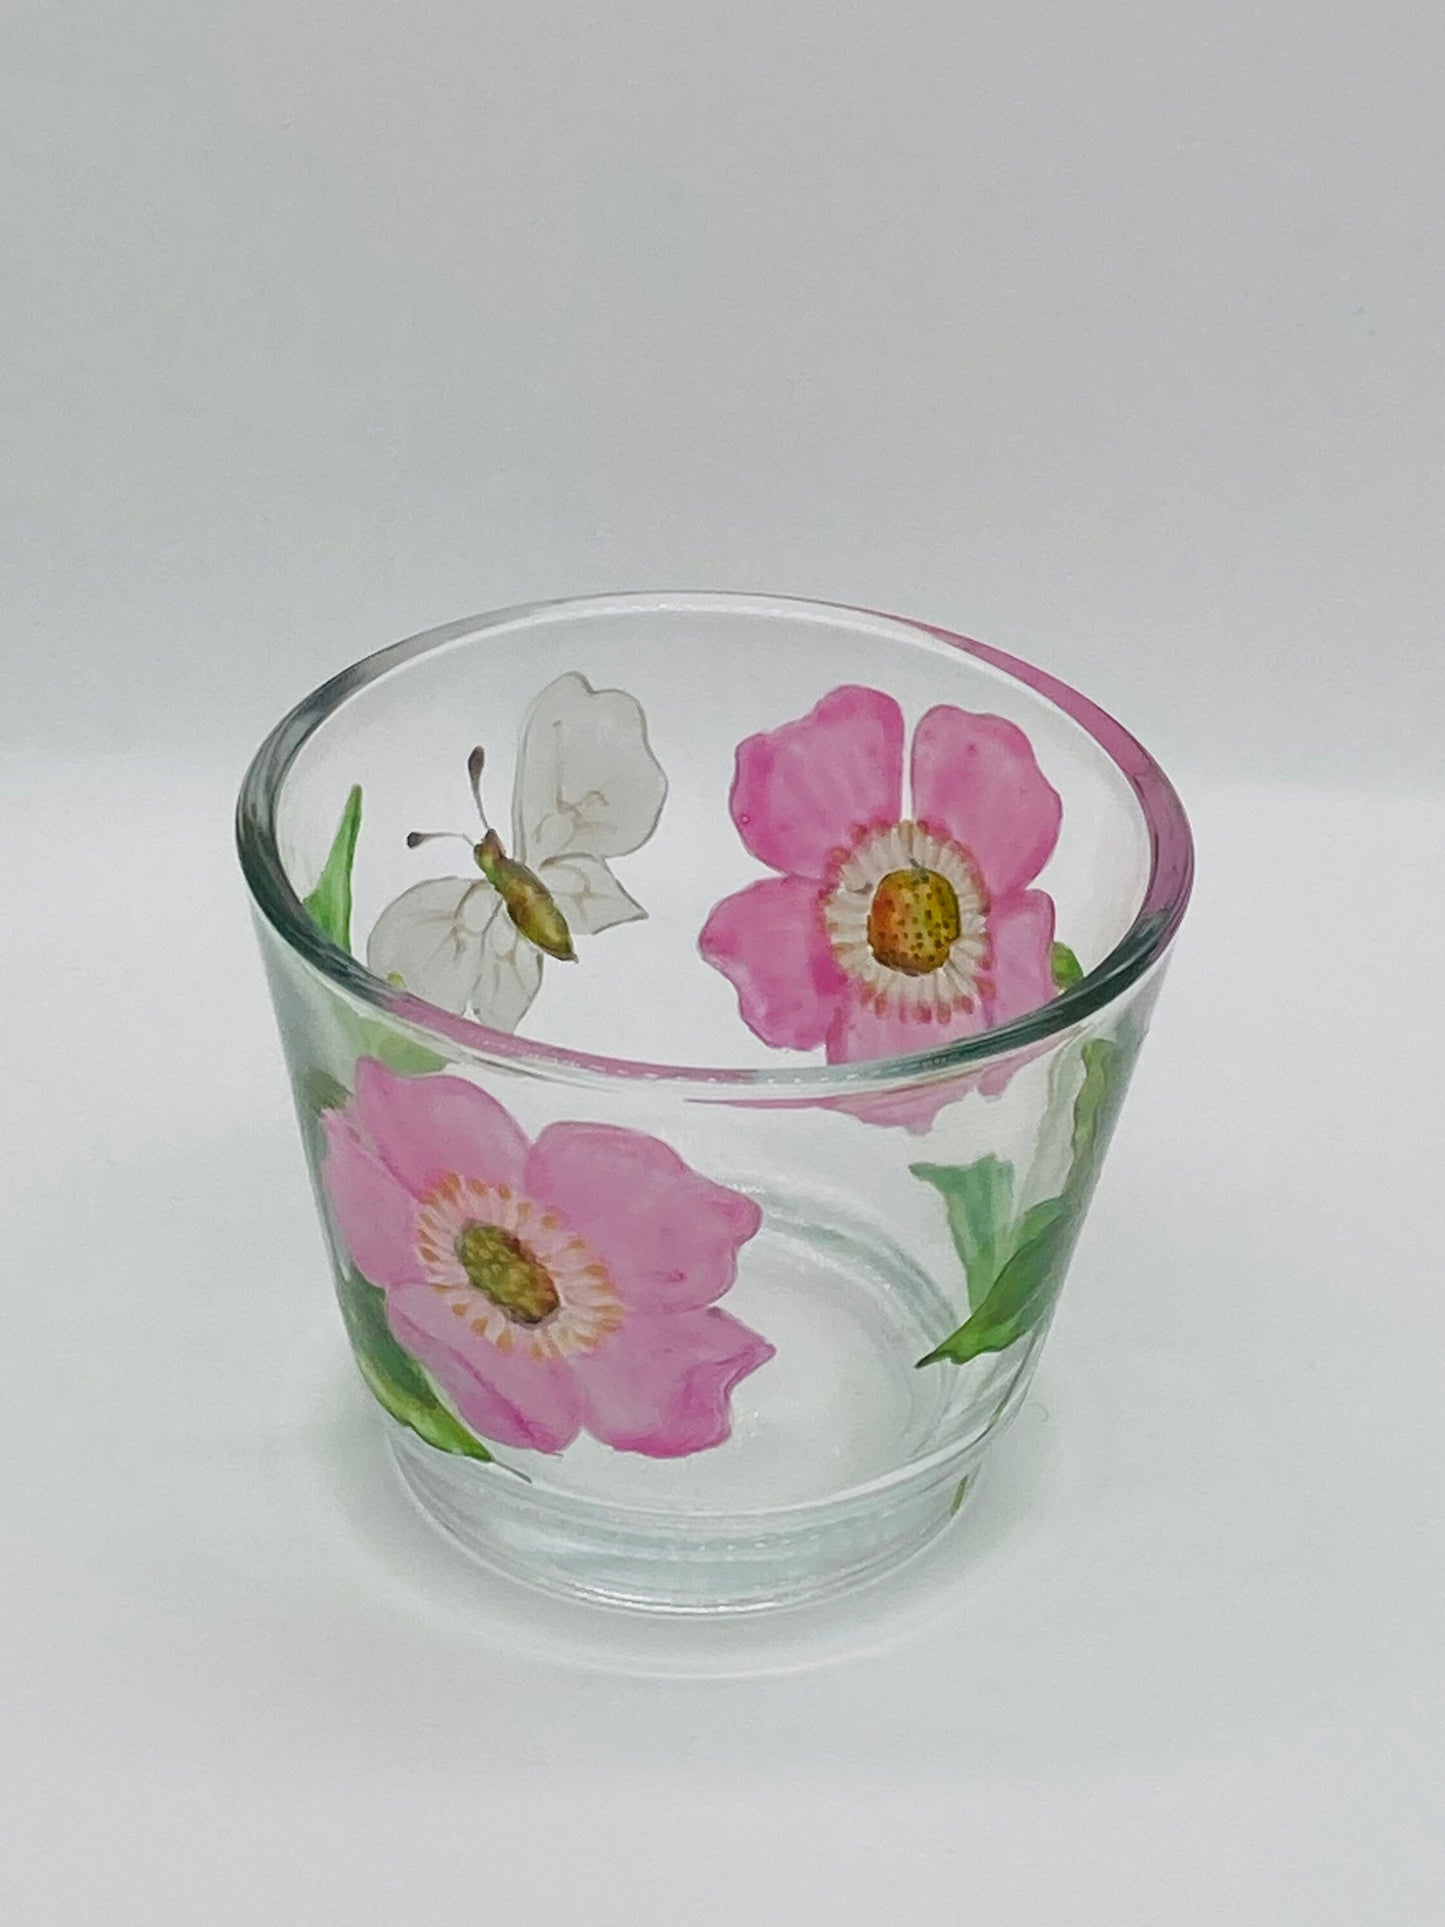 Pink Briar Rose and Butterfly design tealight holder